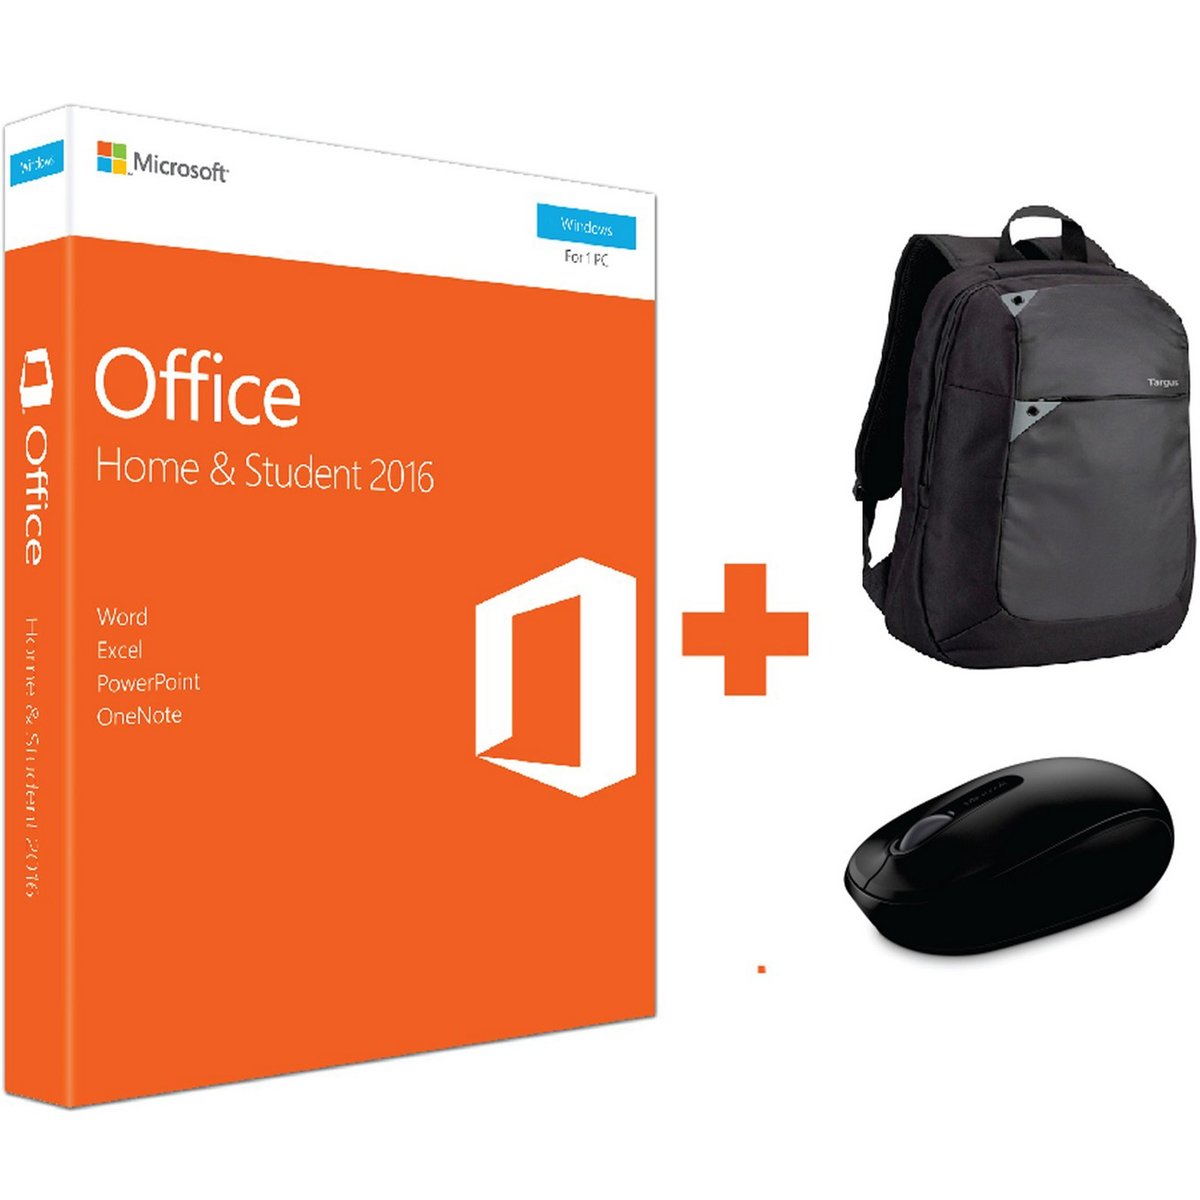 Microsoft Office Home & Student 2016 + Targus Back Pack + Microsoft Wireless Mouse